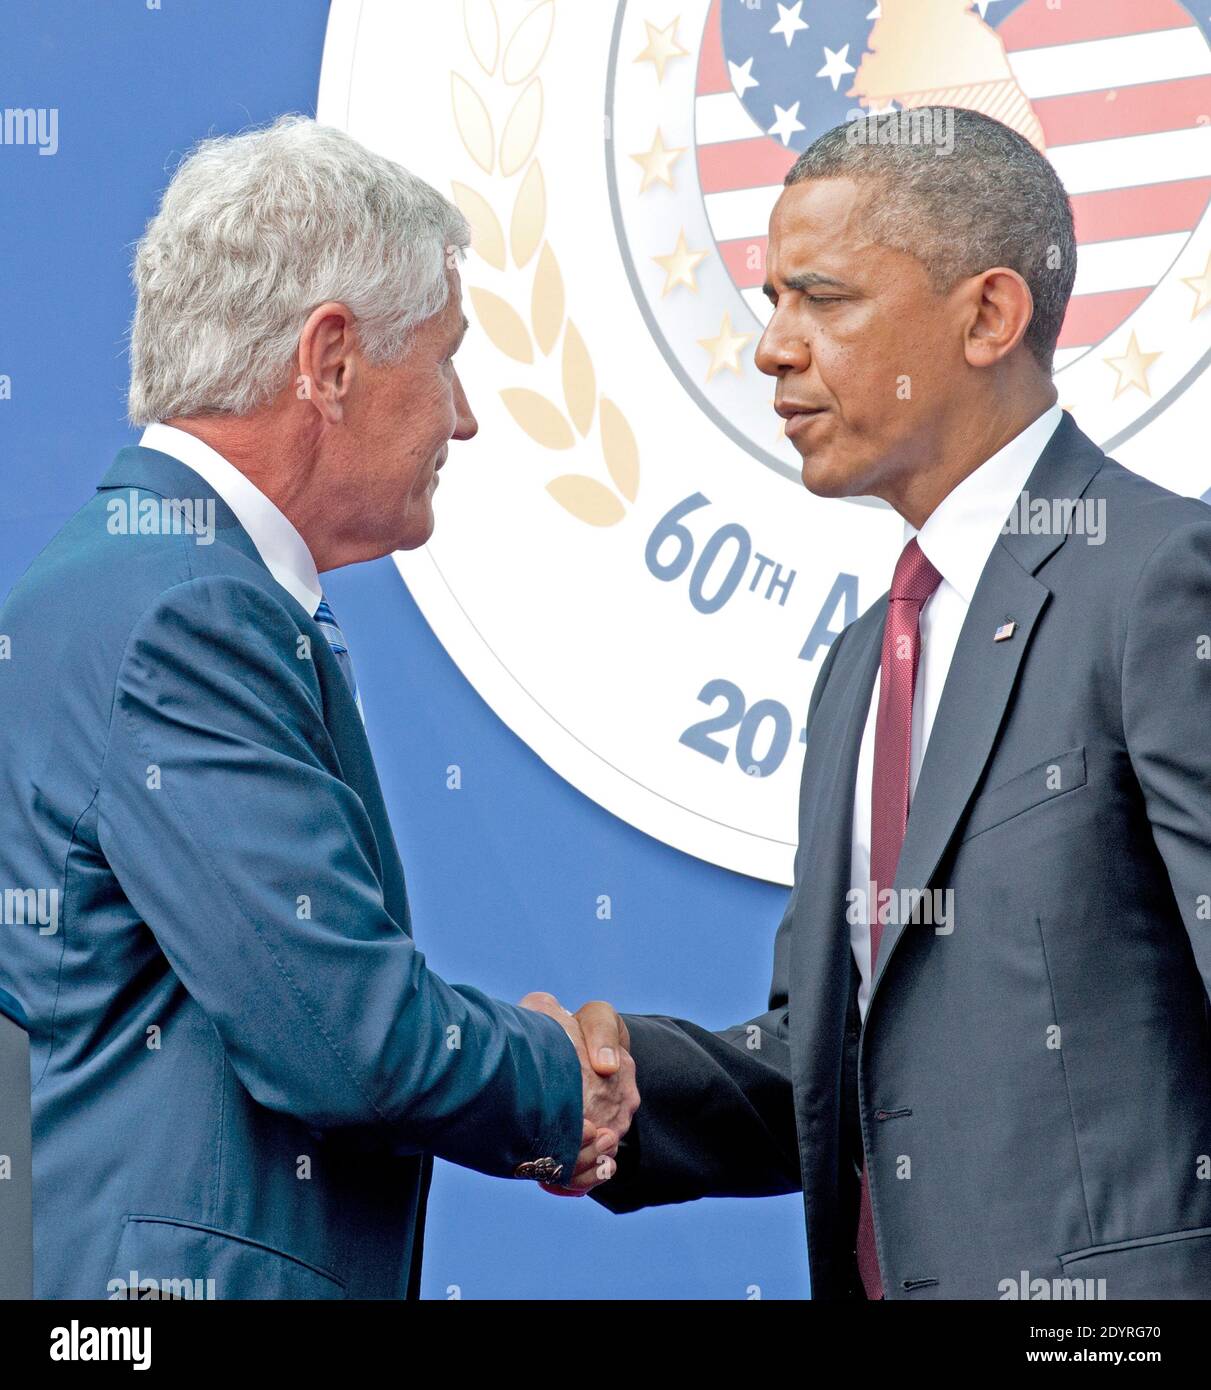 United States Secretary of Defense Chuck Hagel shakes hands with U.S. President Barack Obama prior to the President's remarks marking the 60th Anniversary of the Korean War Armistice at the Korean War Veterans Memorial in Washington, D.C., USA, on Saturday, July 27, 2013. Photo by Ron Sachs/Pool/ABACAPRESS.COM Stock Photo